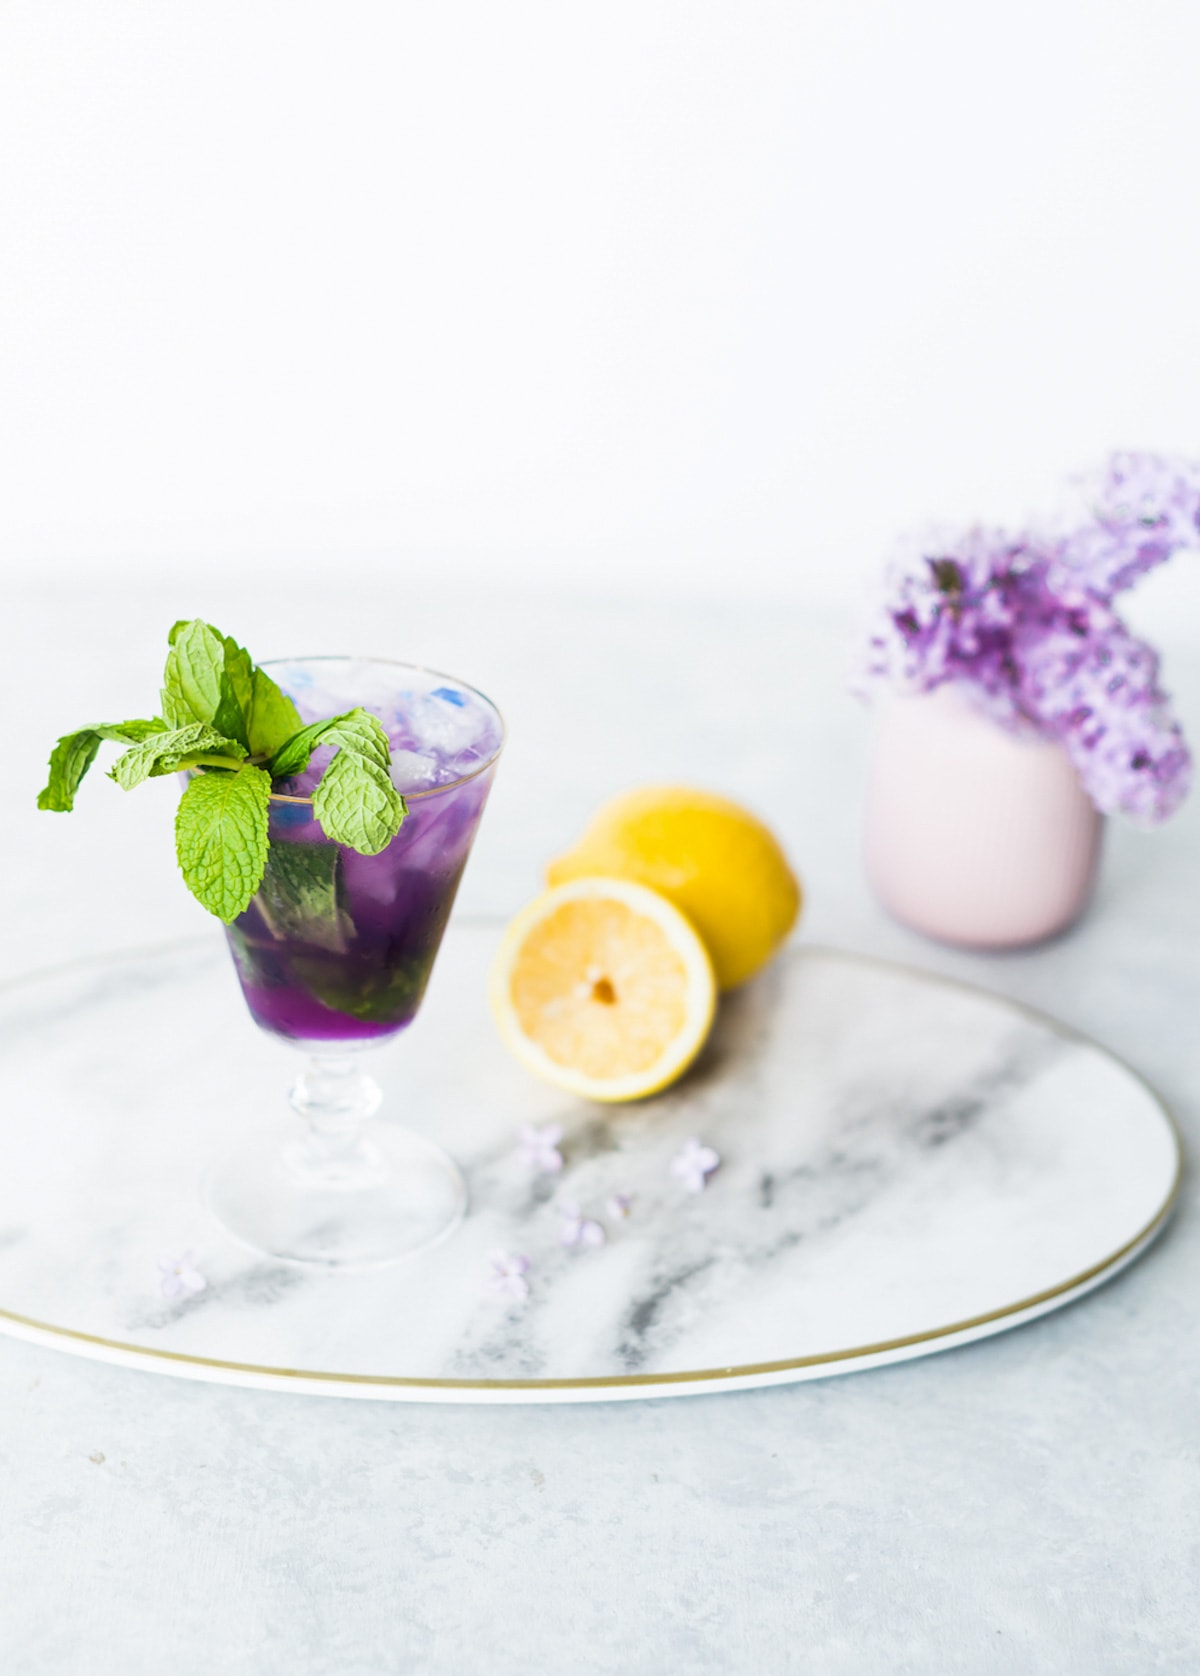 photo of a mint julep inspired cocktail, the Butterfly Pea Flower Tea Cocktail recipe by top Houston lifestyle blogger Ashley Rose of Sugar & Cloth